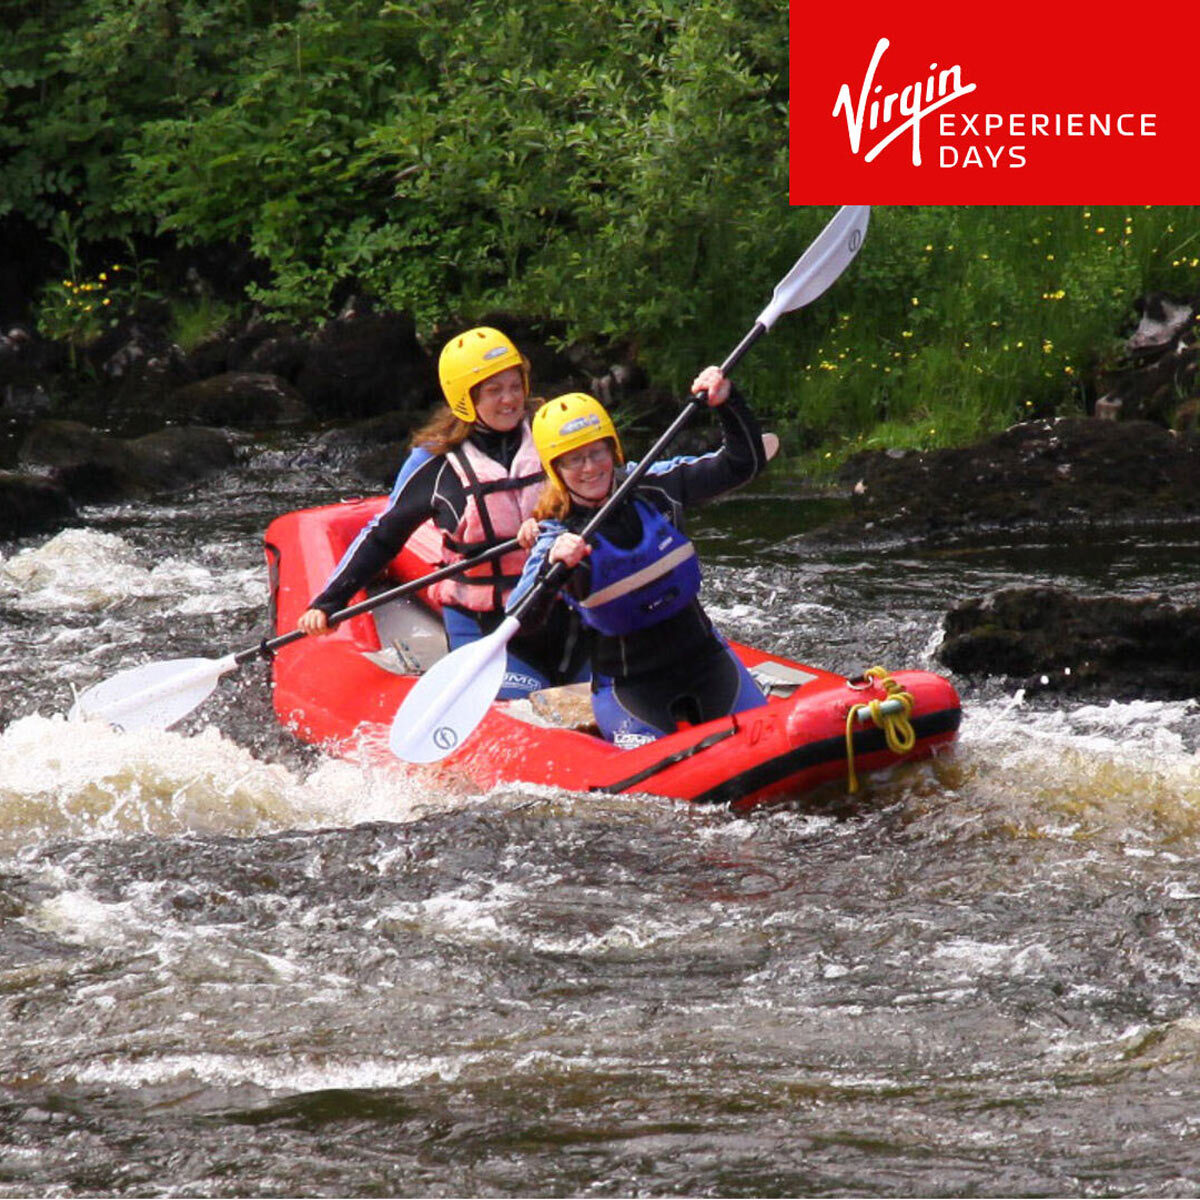 Buy Virgin Experience White Water Rafting for 2 Image2 at Costco.co.uk